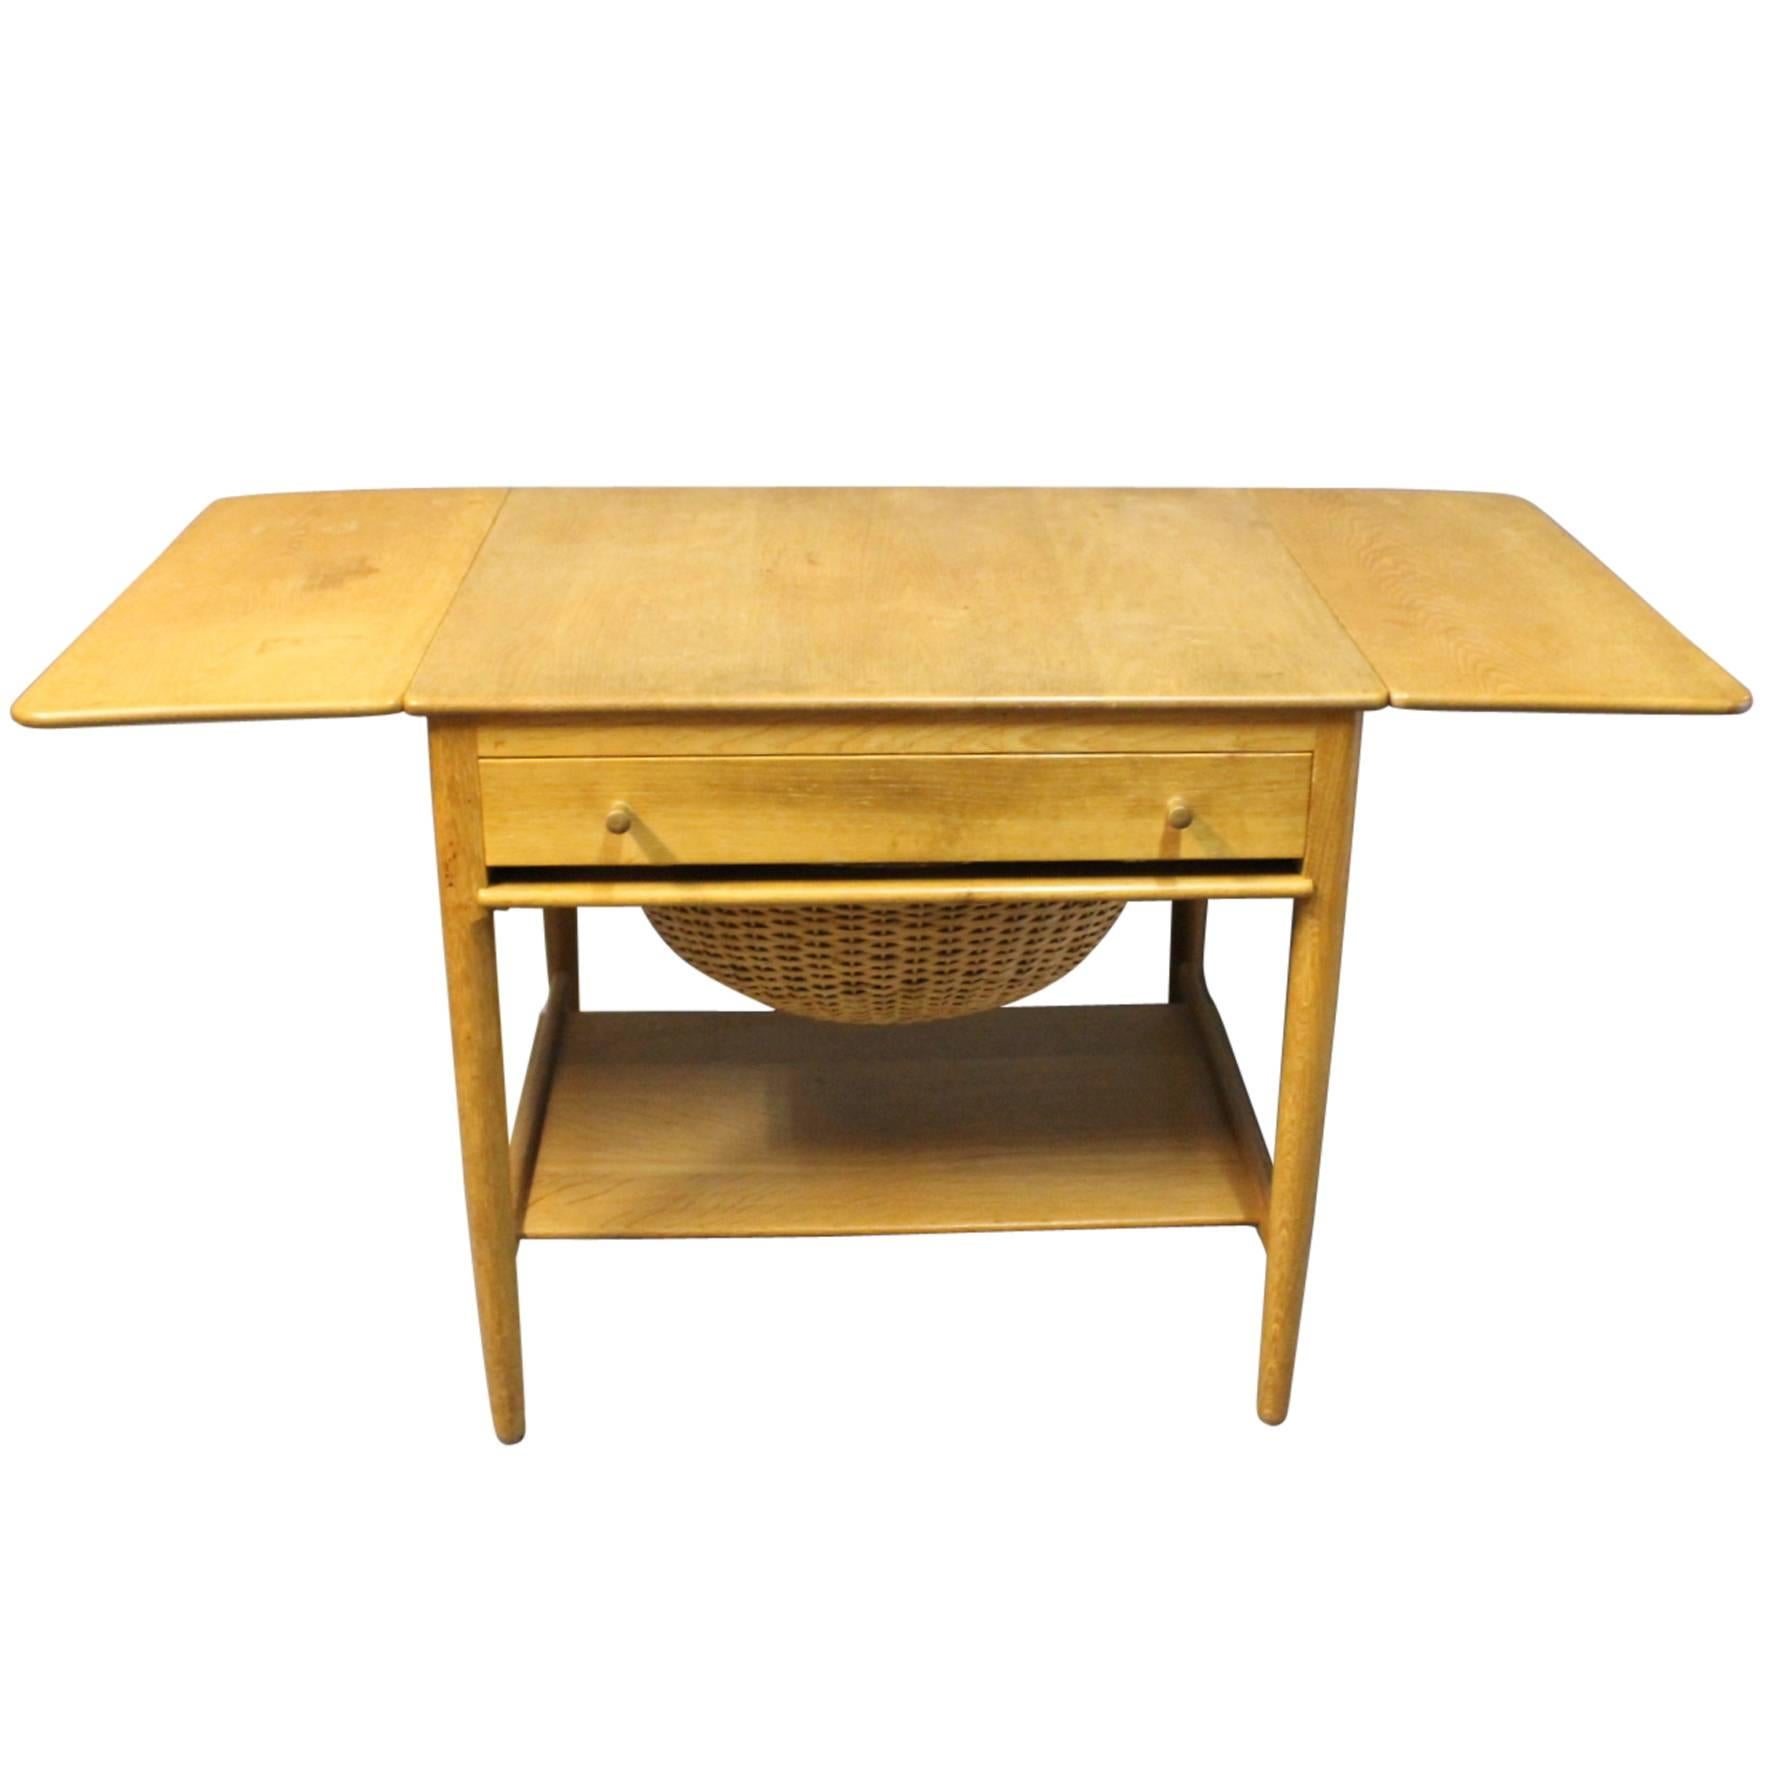 Work Table in Oak by Hans J. Wegner and Manufactured by Andreas Tuck, circa 1960